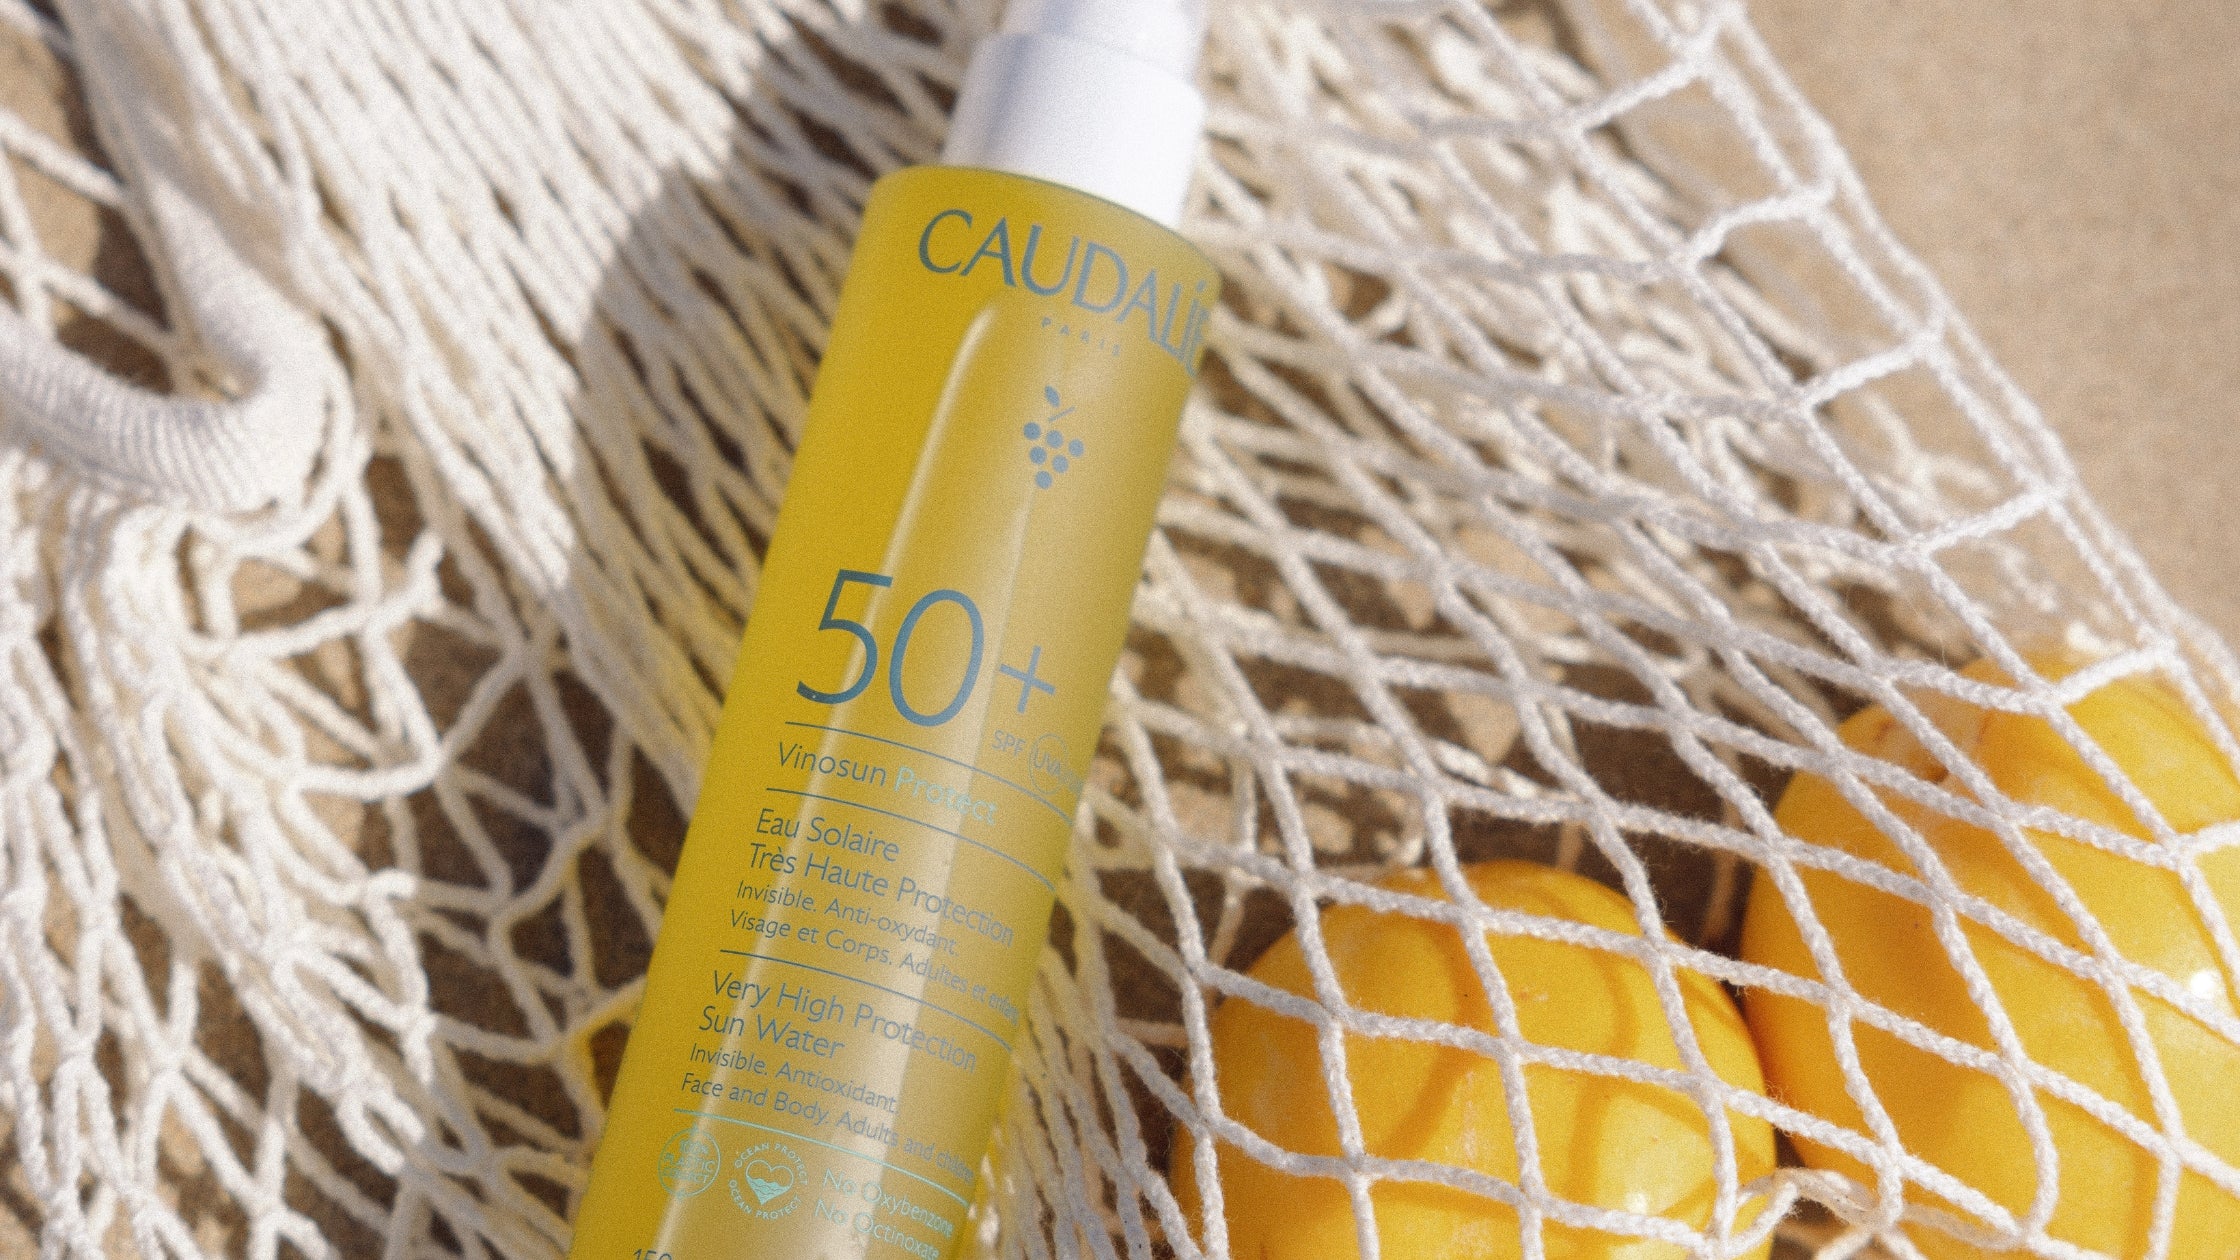 Get a free Caudalie Sunscreen with your order.